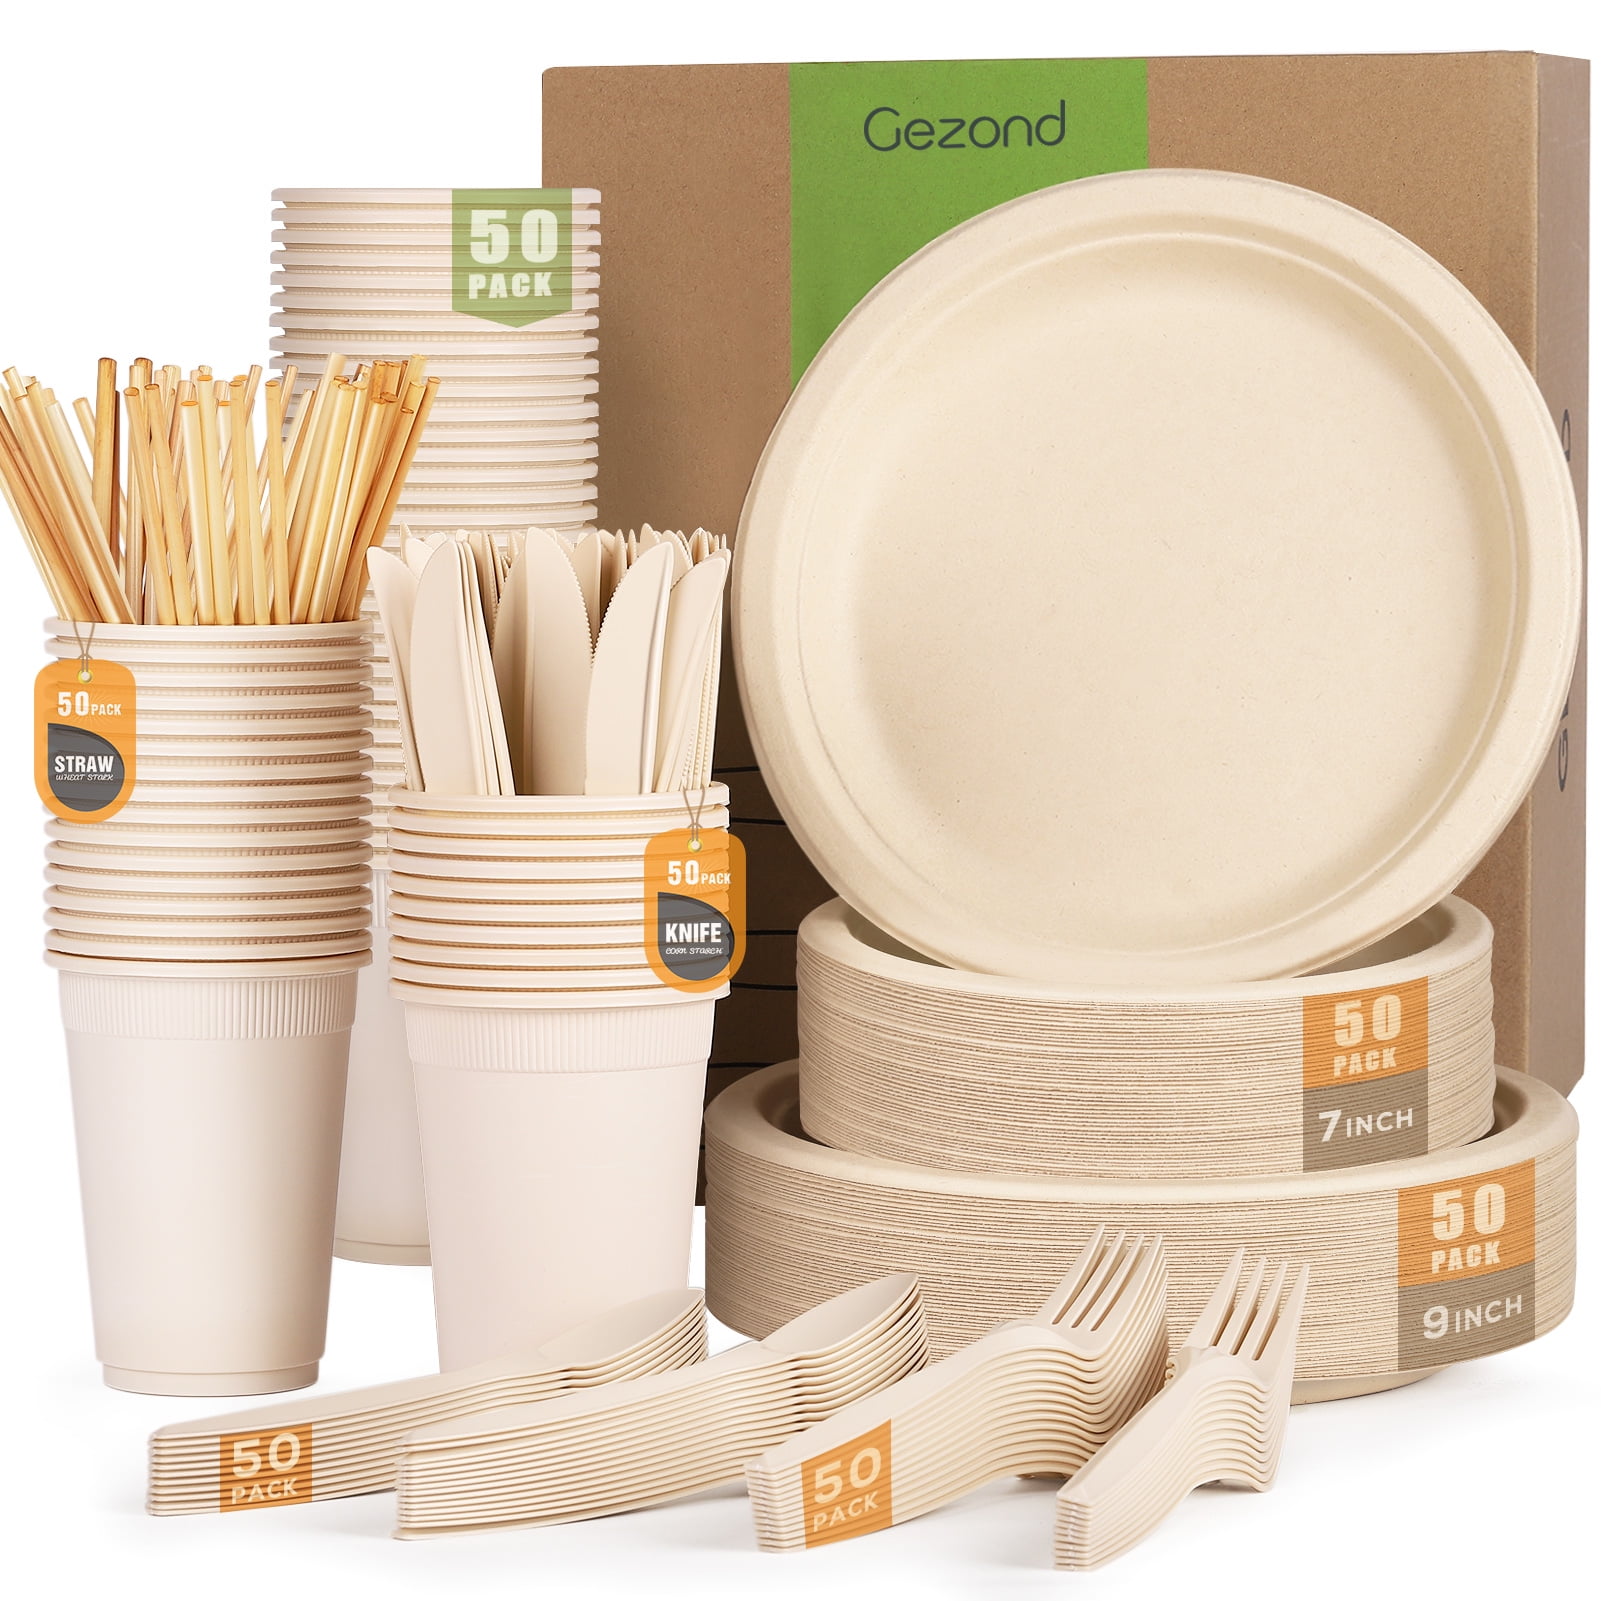 Pro-Grade, Biodegradable 10 Inch Plates. Bulk 25 Pack Great for Lunch,  Dinner Parties and Potlucks. Disposable, Compostable Wheatstraw Paper